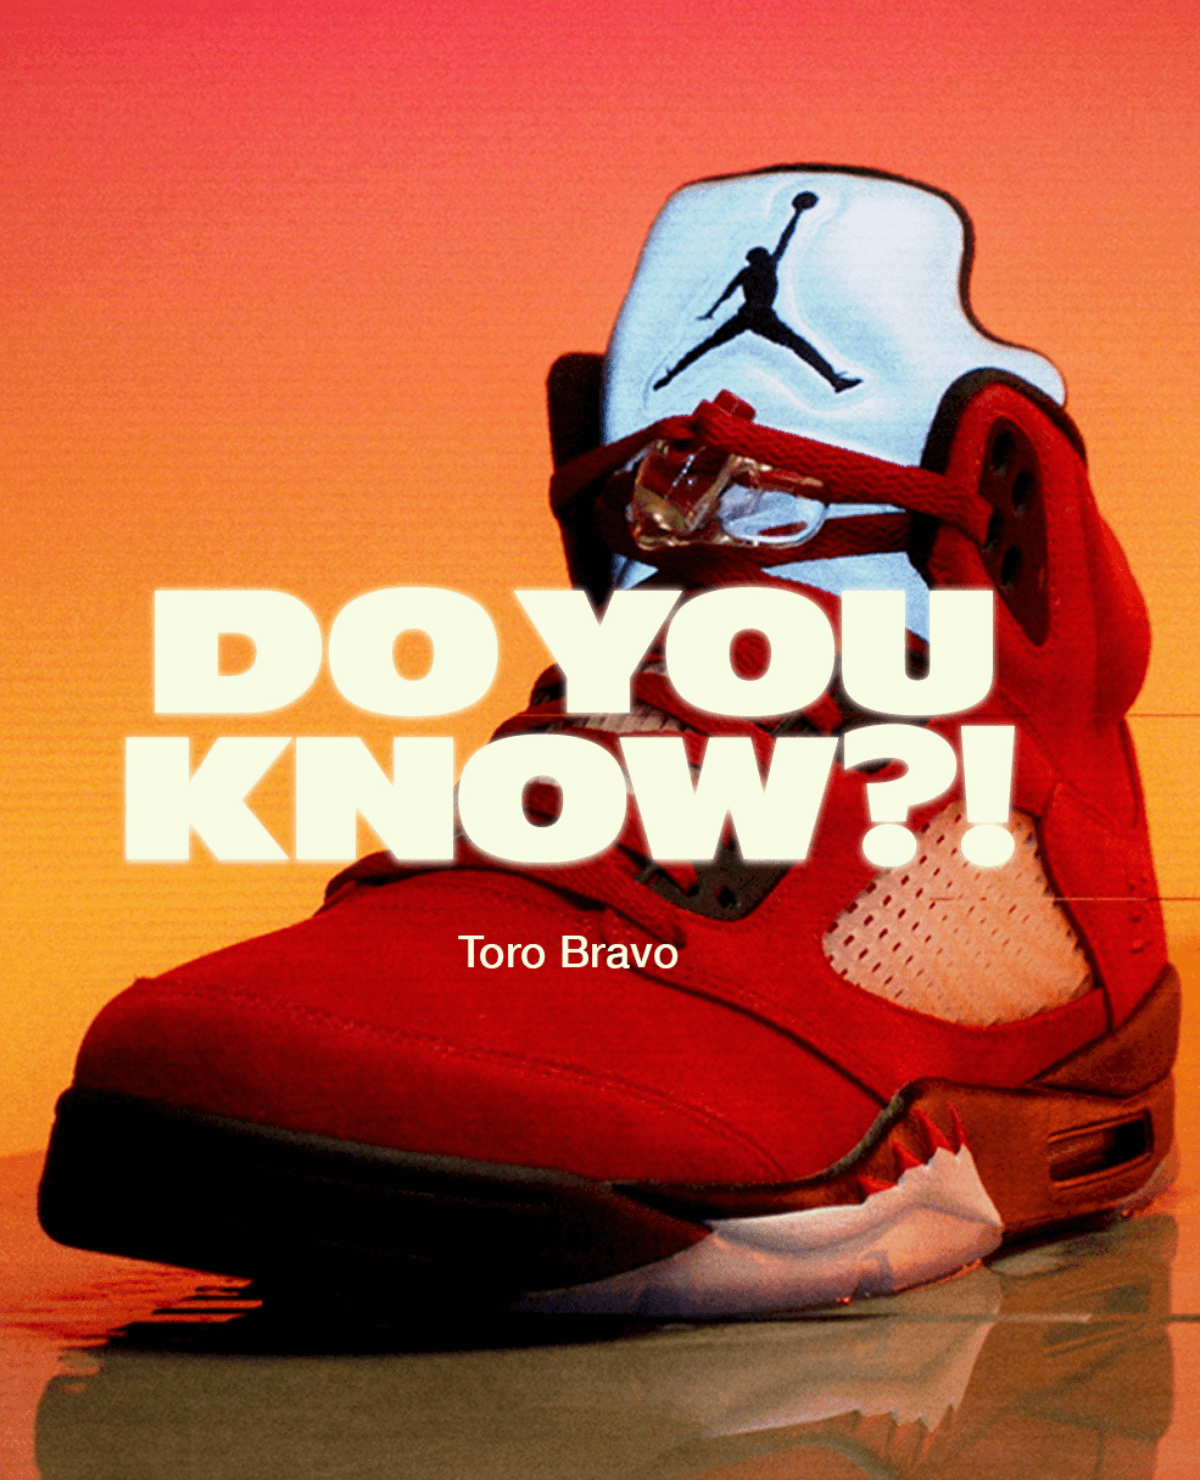 Red Jordan 5 Sneaker with text reading Do you know?! Toro Bravo